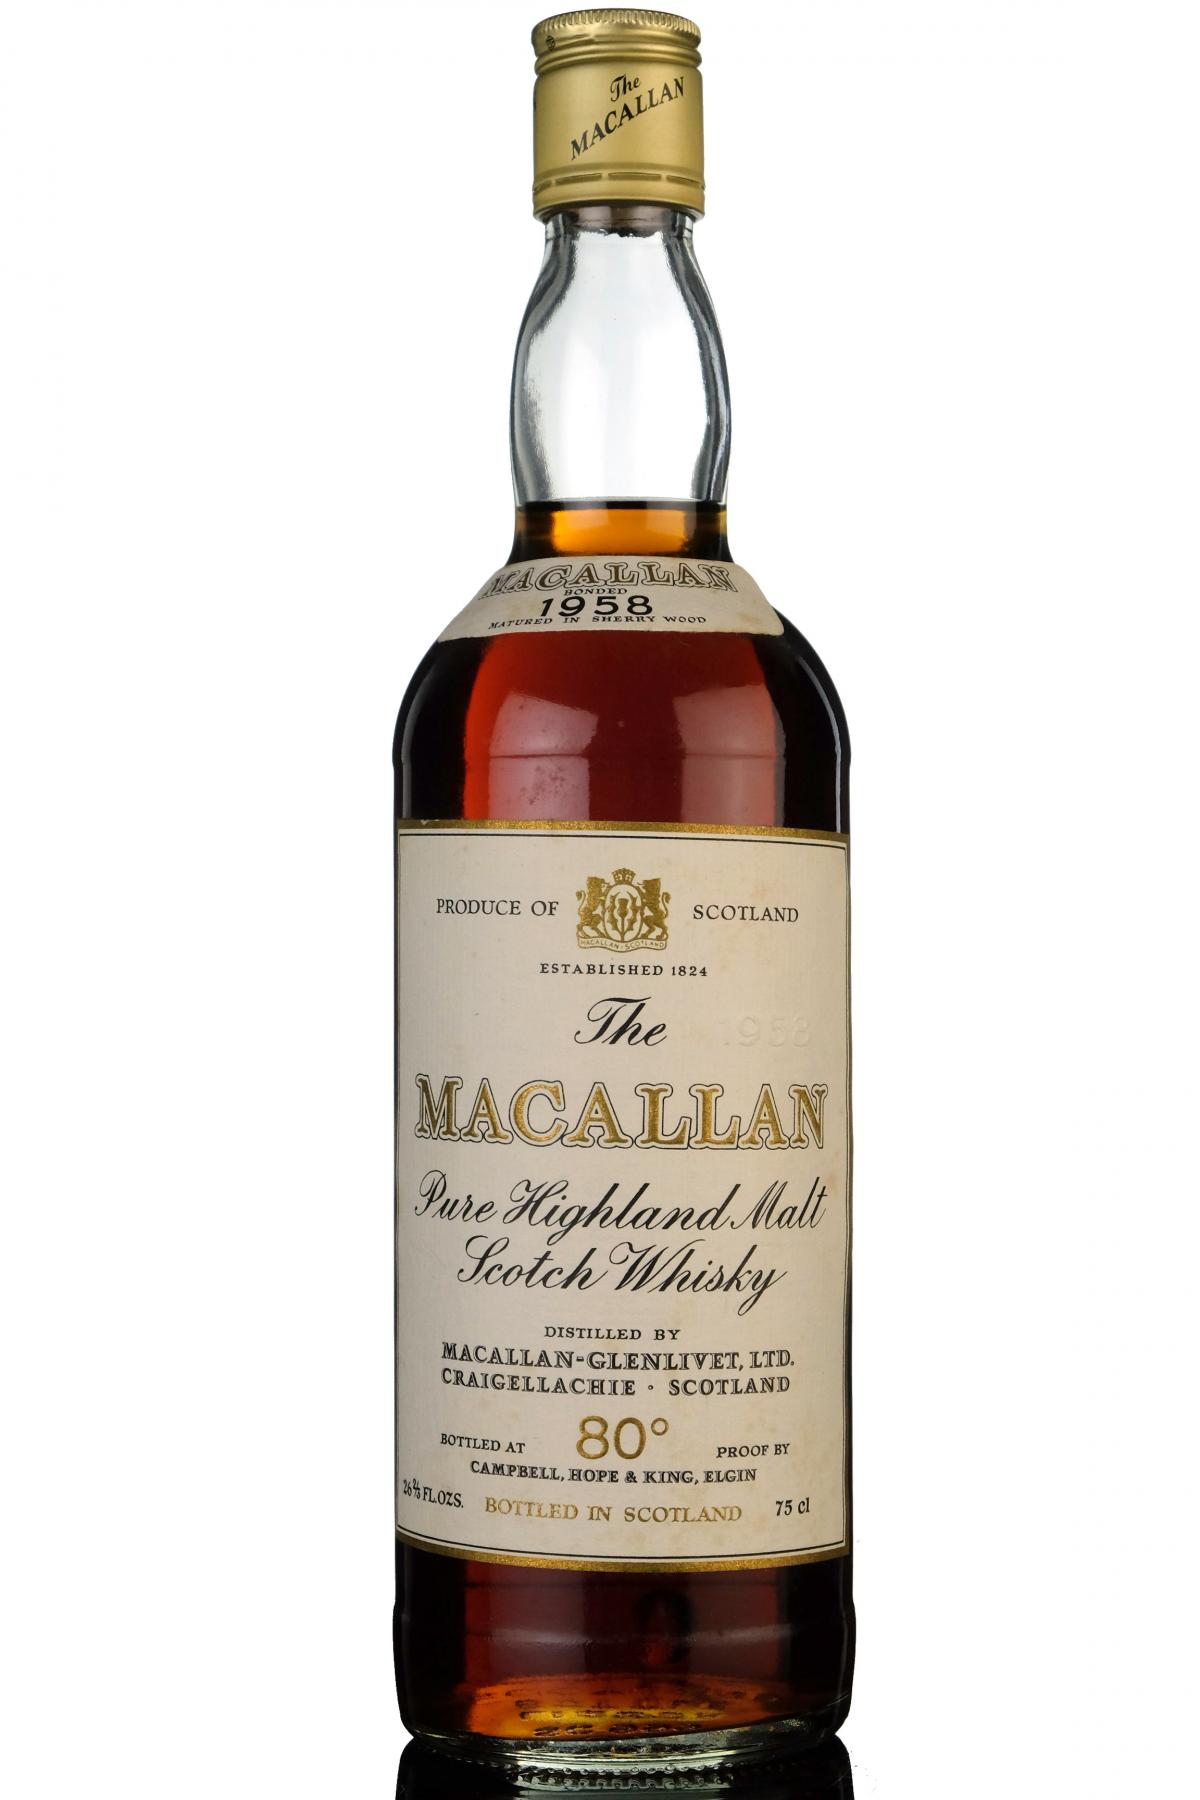 Macallan 1958 - Campbell Hope & King - 1970s